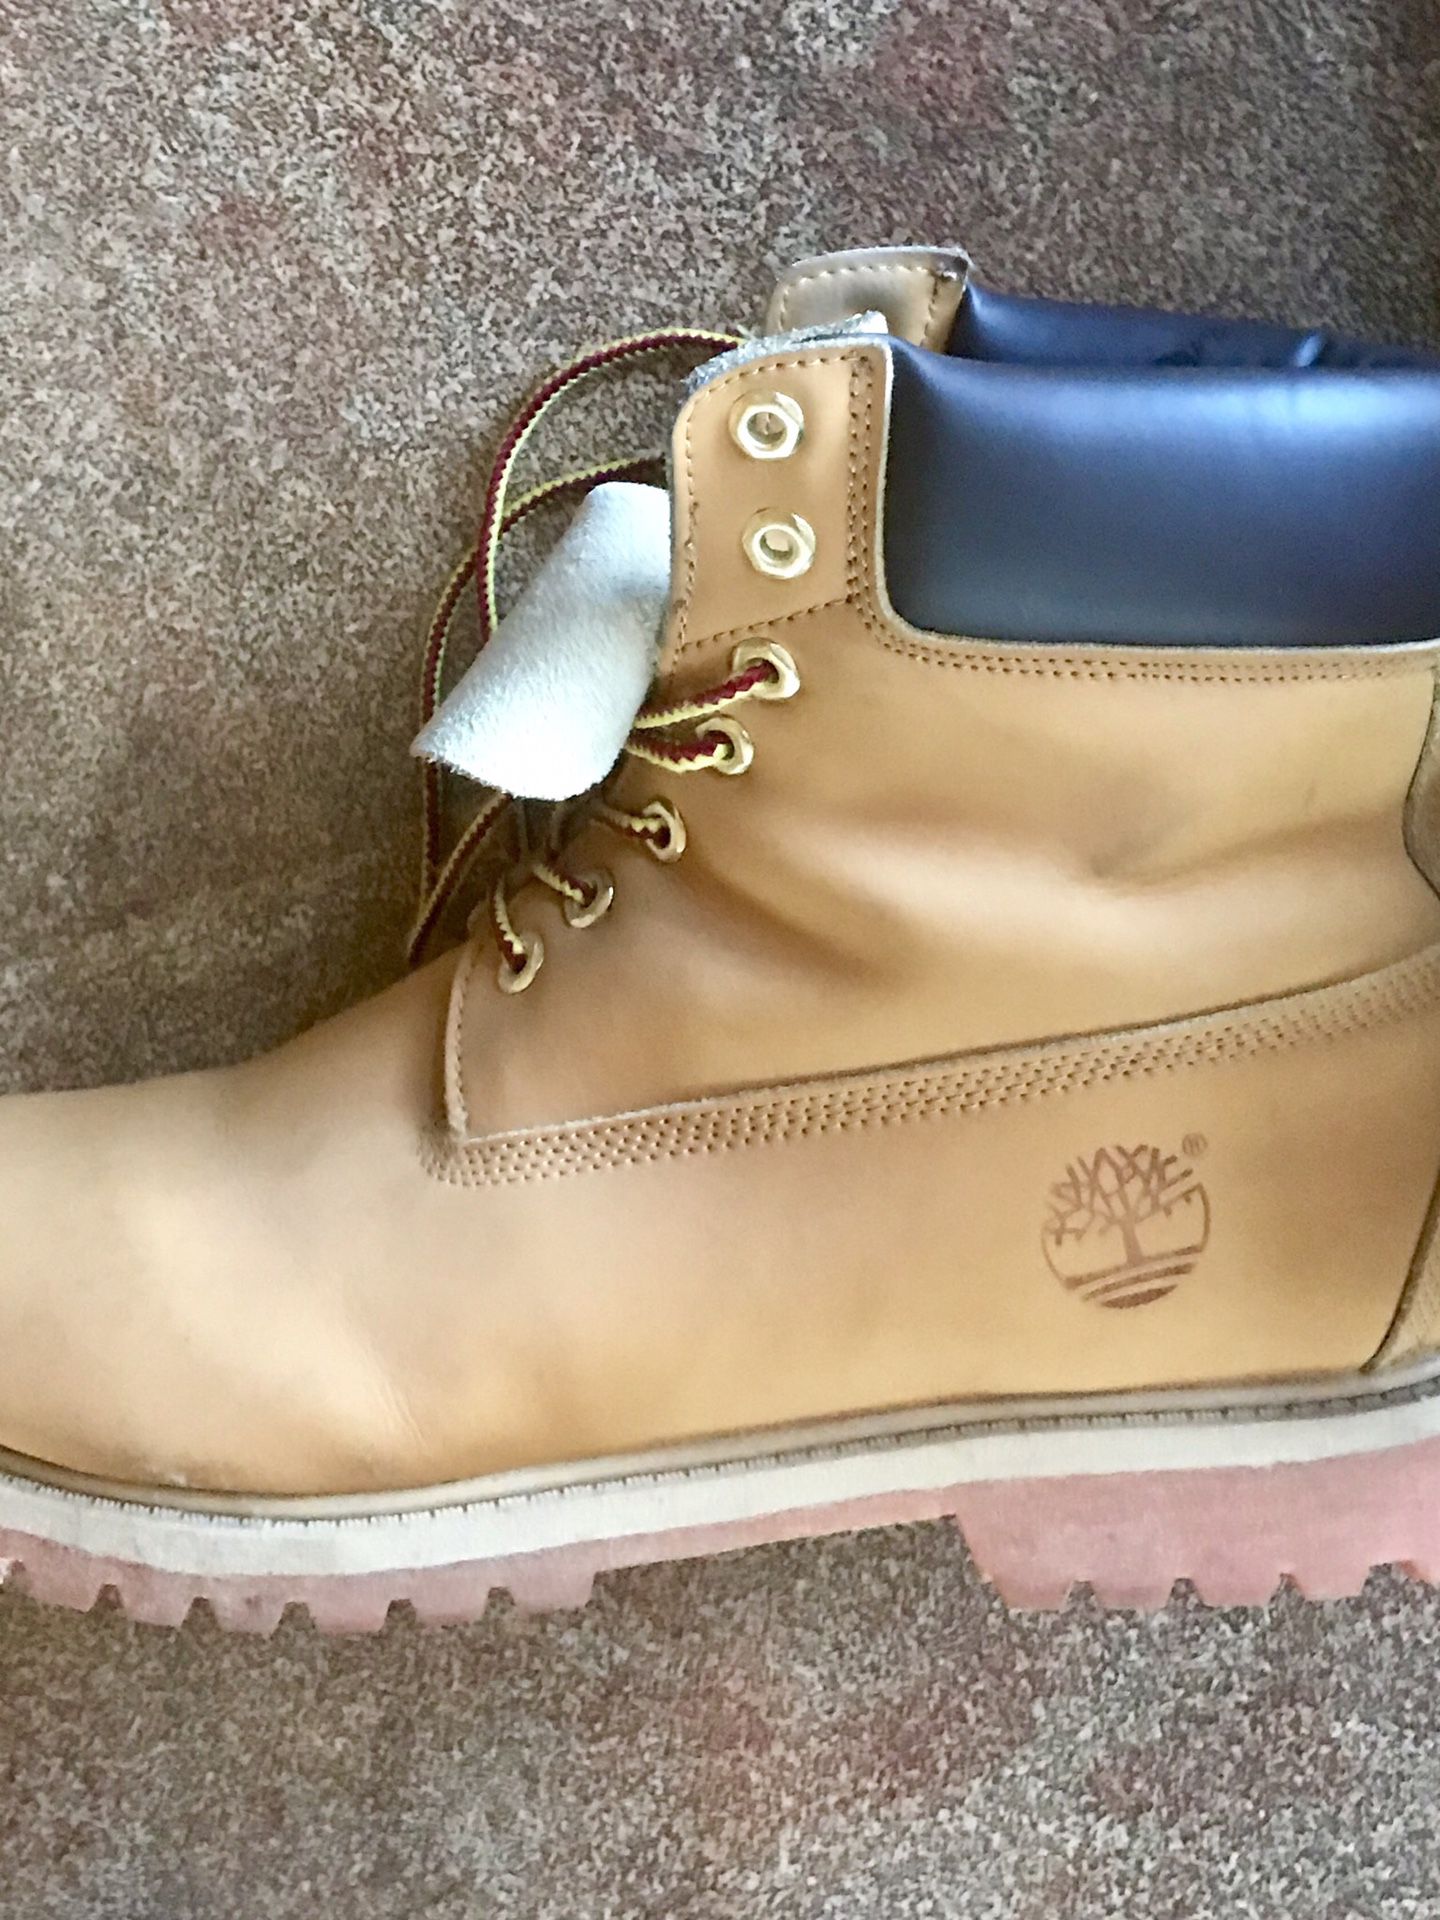 Men’s timberland boots size 13